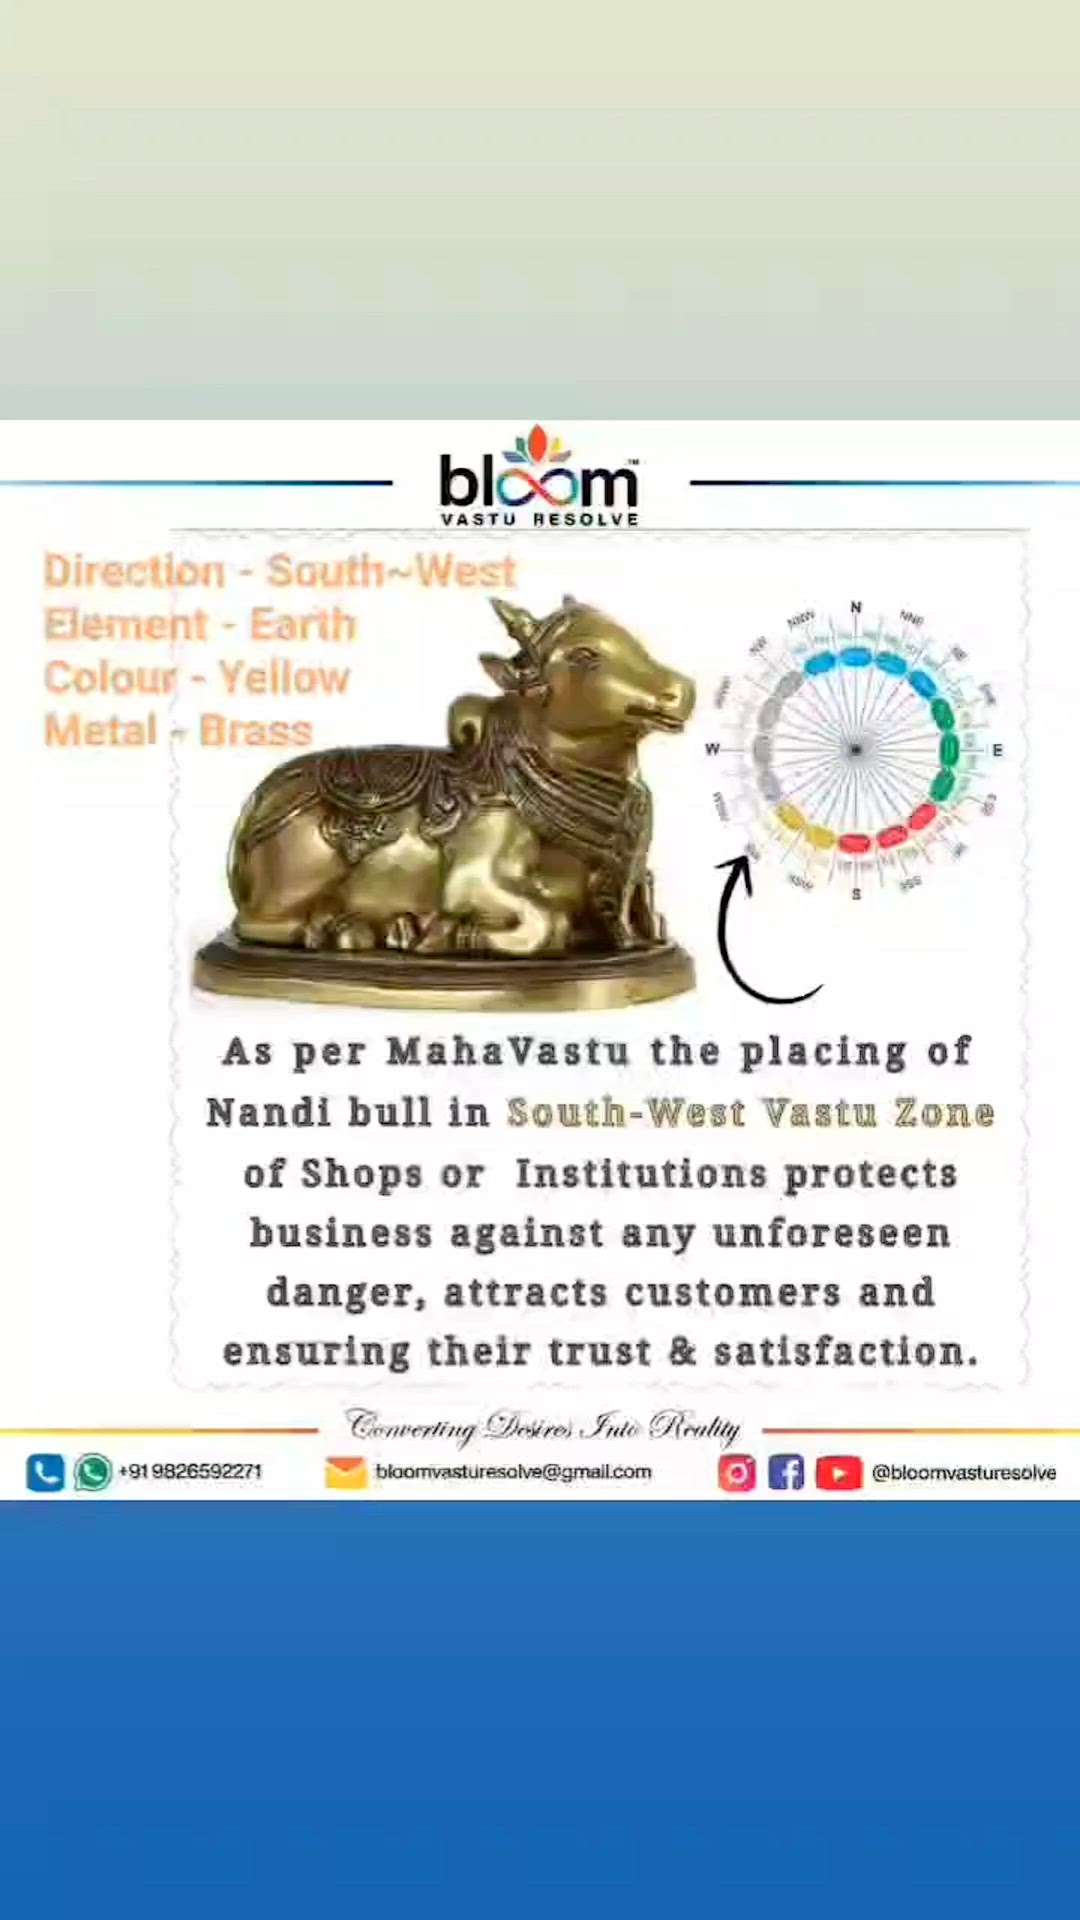 Your queries and comments are always welcome.
For more Vastu please follow @bloomvasturesolve
on YouTube, Instagram & Facebook
.
.
For personal consultation, feel free to contact certified MahaVastu Expert through
M - 9826592271
Or
bloomvasturesolve@gmail.com
#vastu #वास्तु #mahavastu #mahavastuexpert #bloomvasturesolve  #vastureels #vastulogy #vastuexpert  #vasturemedies  #vastuforhome #vastuforpeace #vastudosh #numerology #vastuforgrowth #numerology #swzone #vastuforbusiness #nandi #southwest